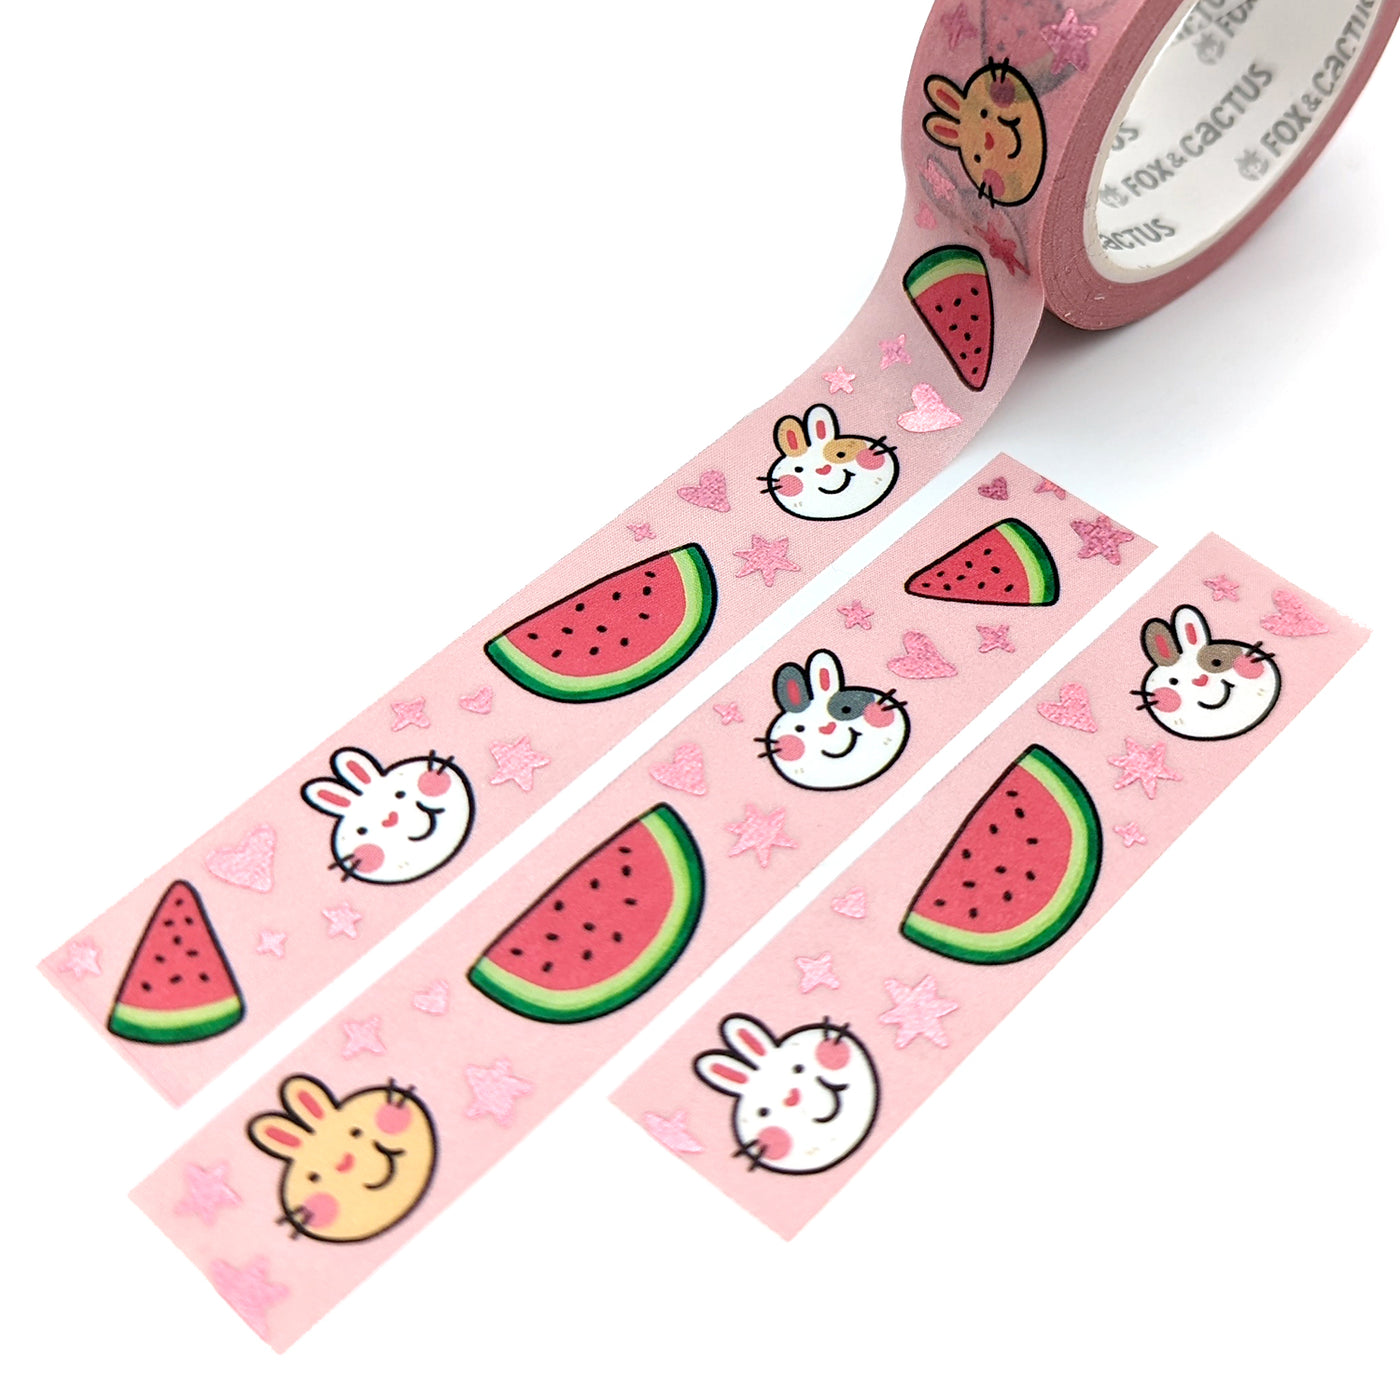 Melon Bunny Washi Tape (Pink Foil) by Fox and Cactus